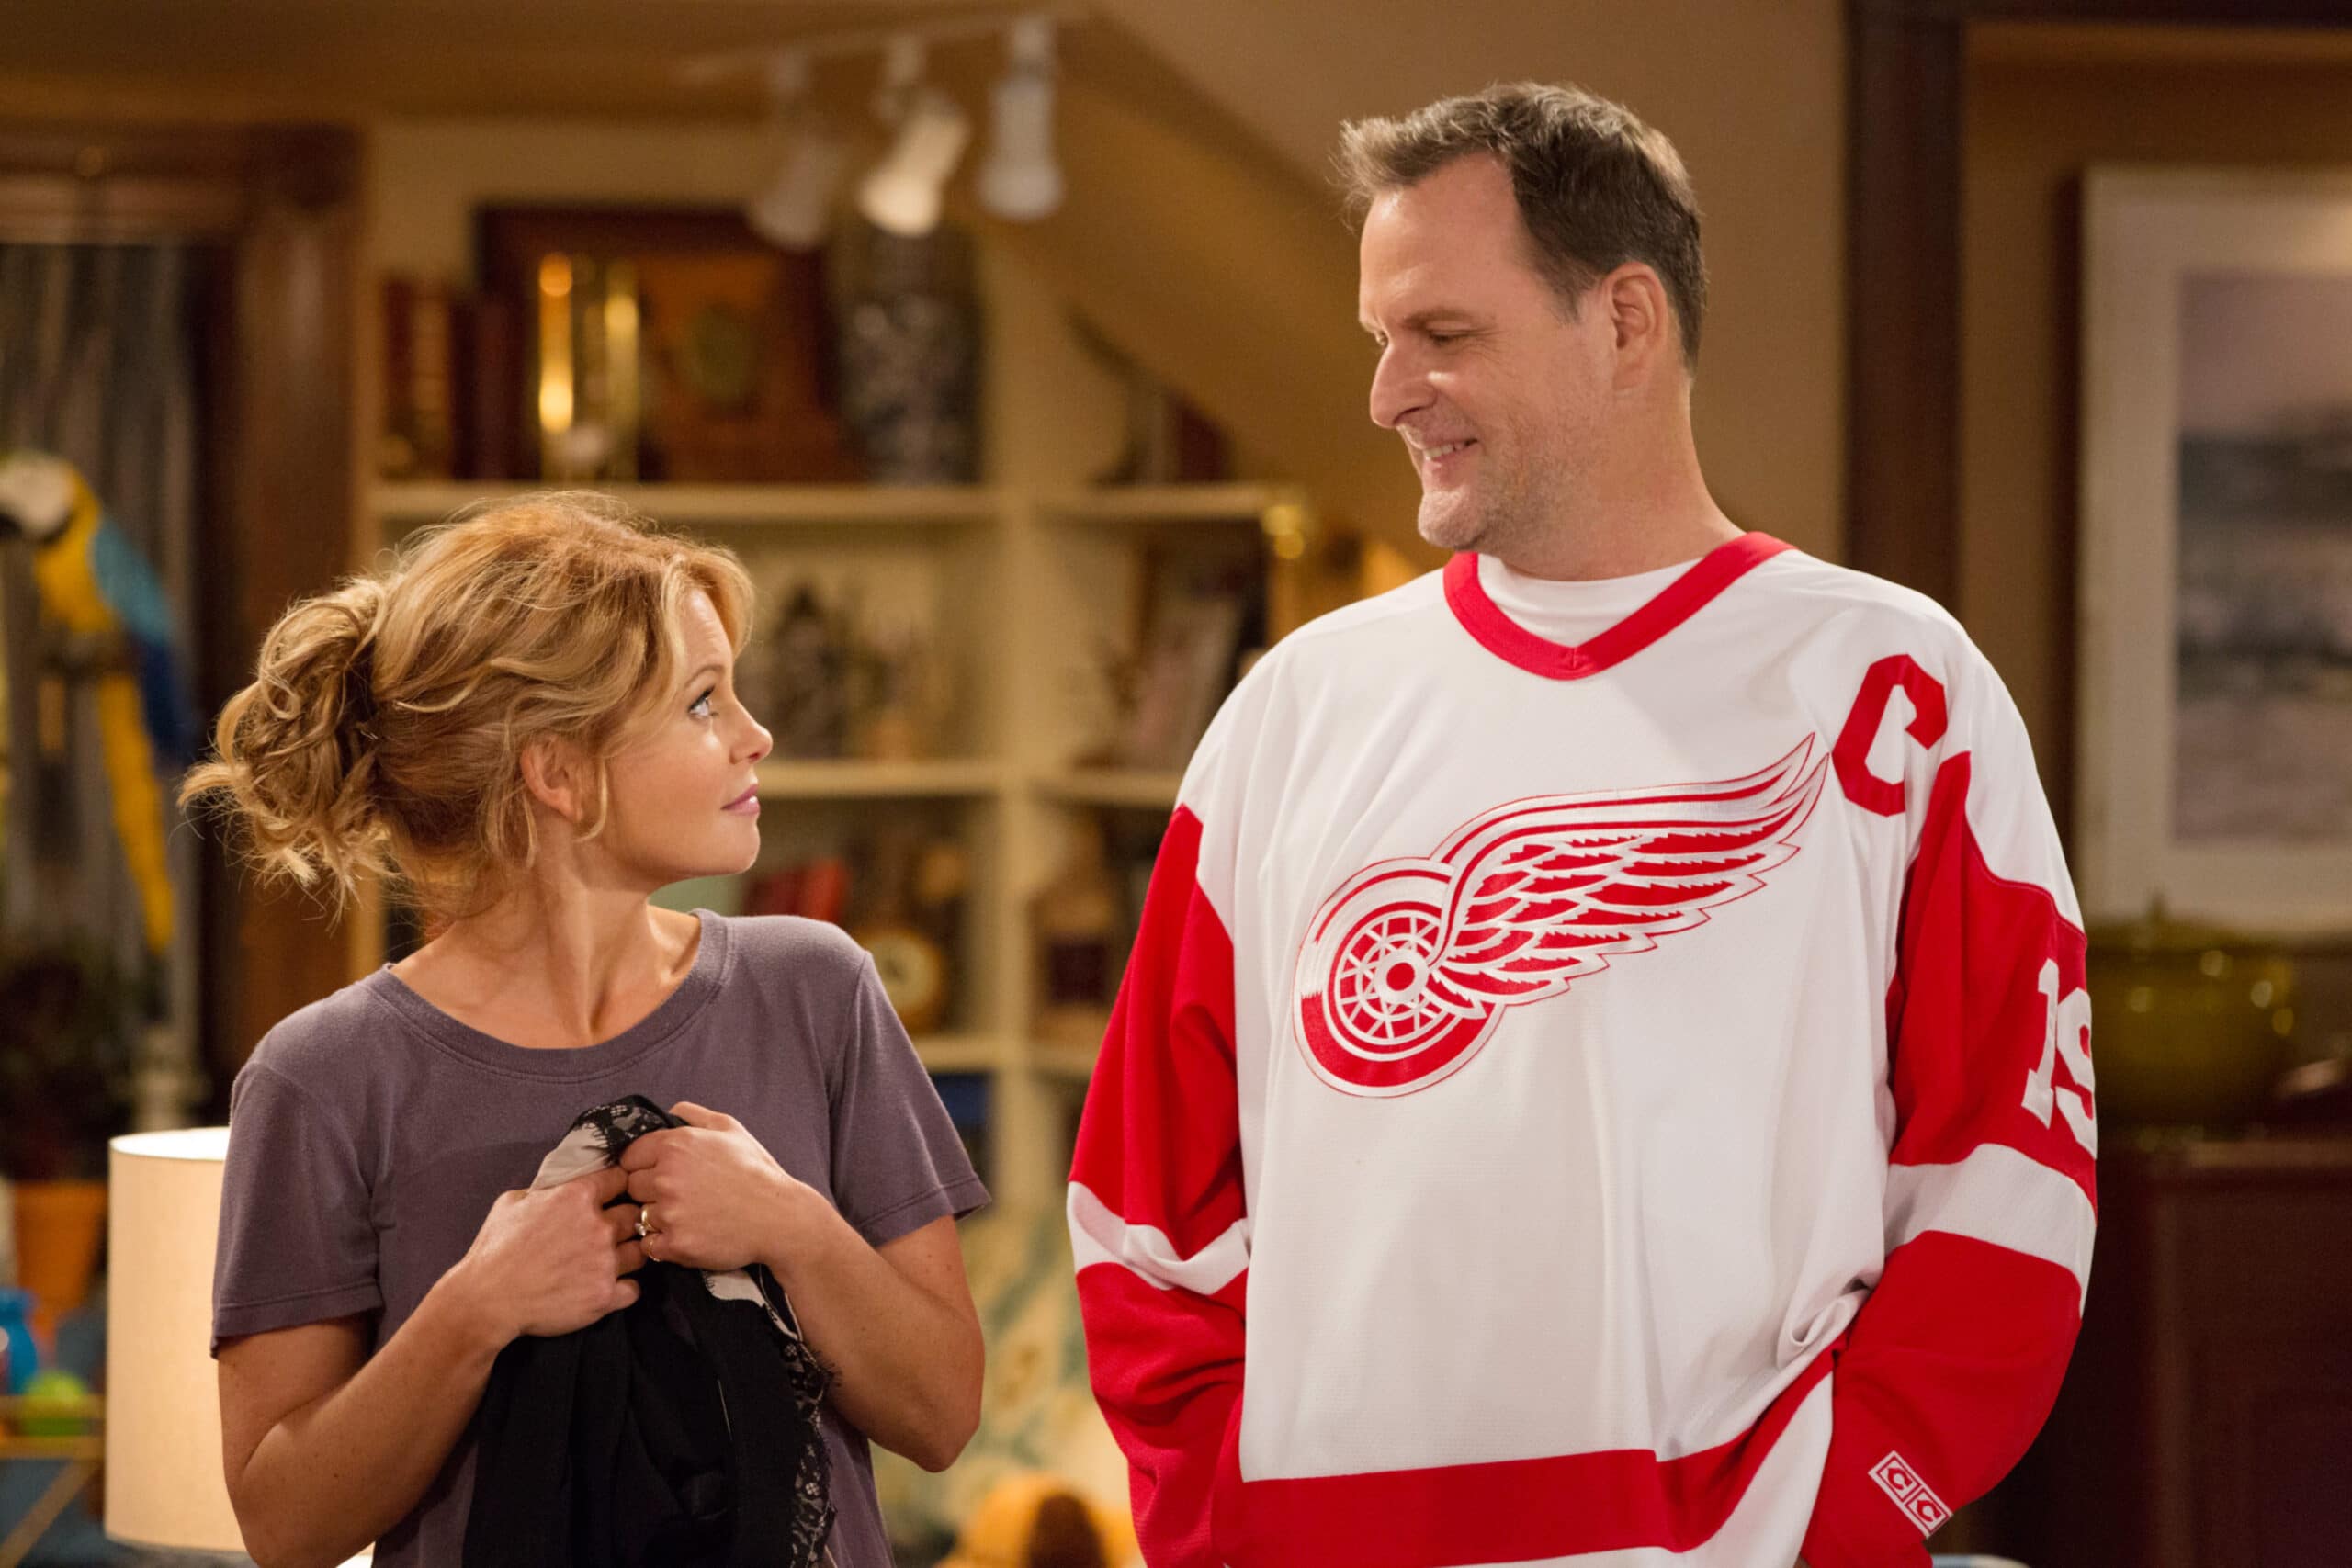 Candace Cameron Burè, Dave Coulier in 'Fuller House'